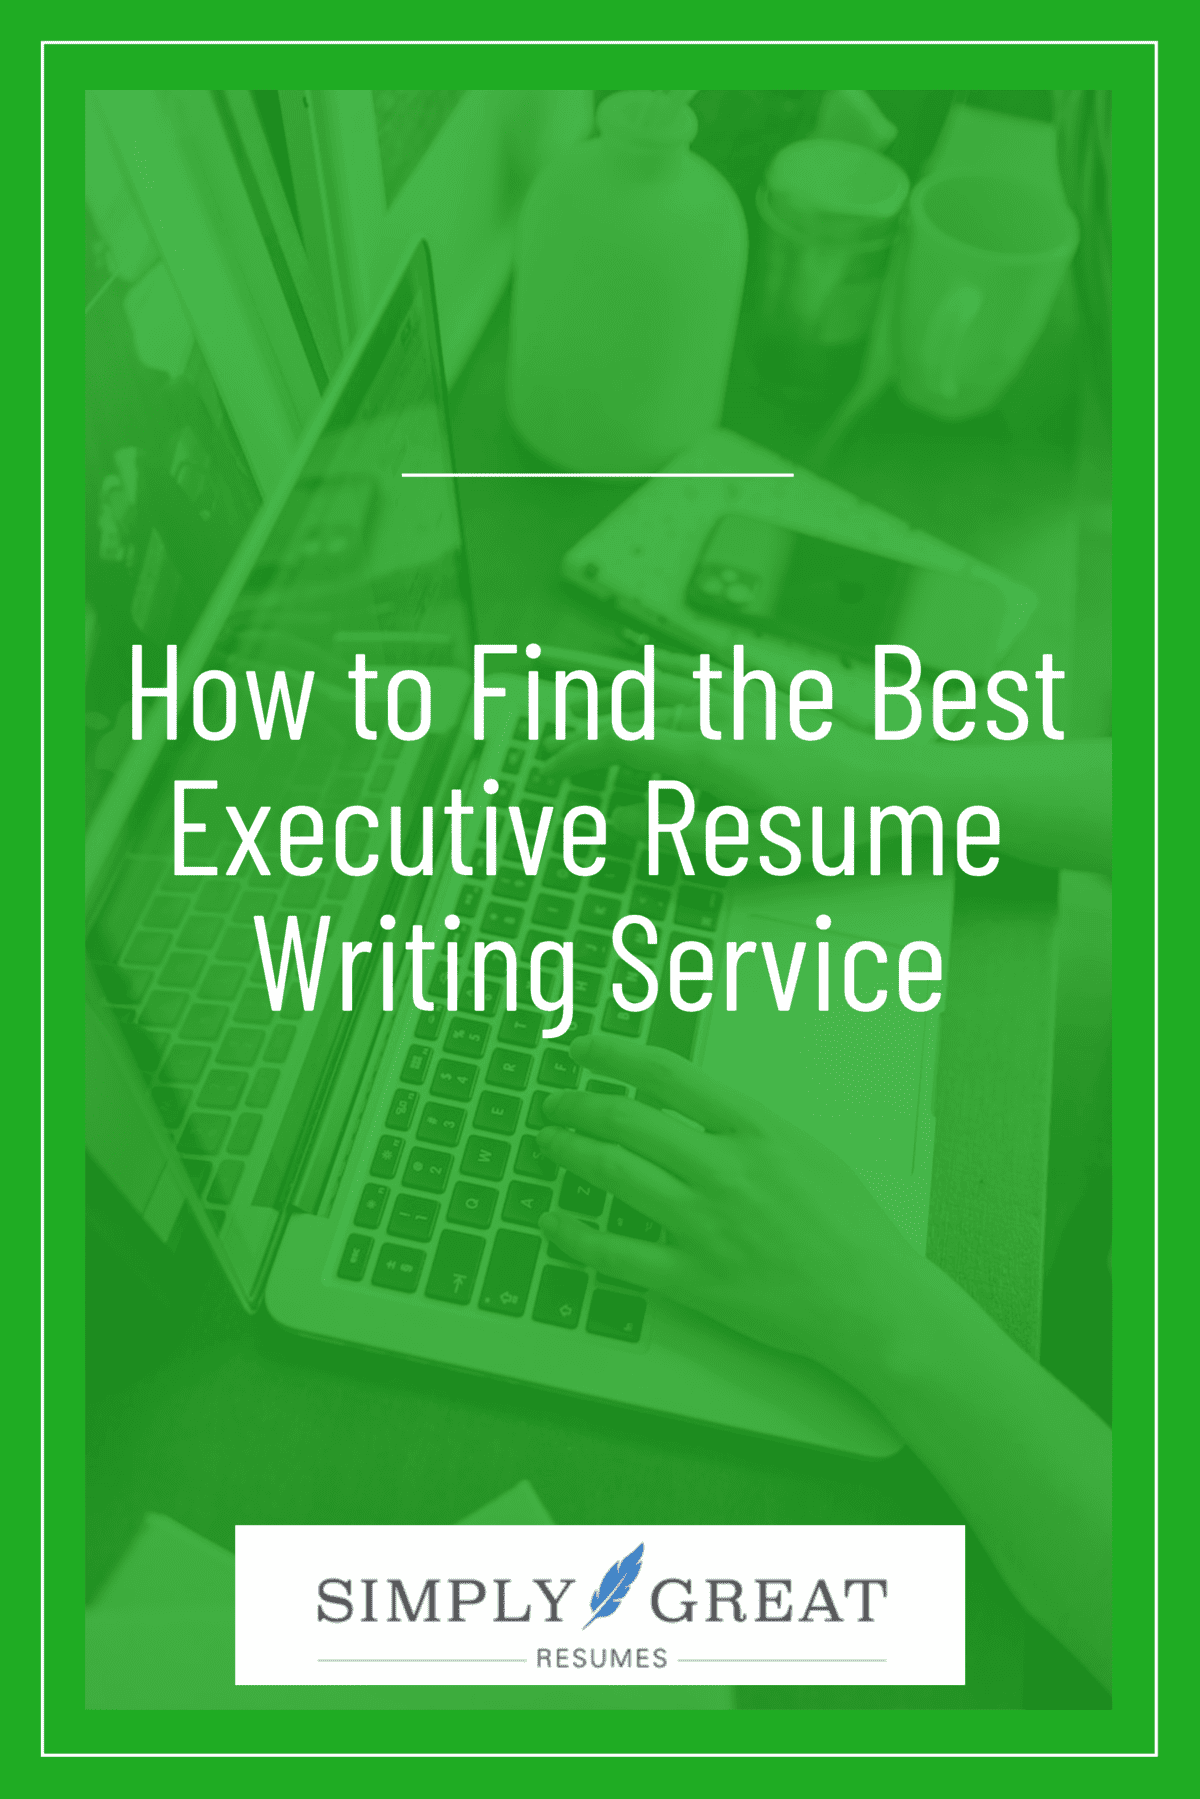 how-to-find-the-best-executive-resume-writing-service